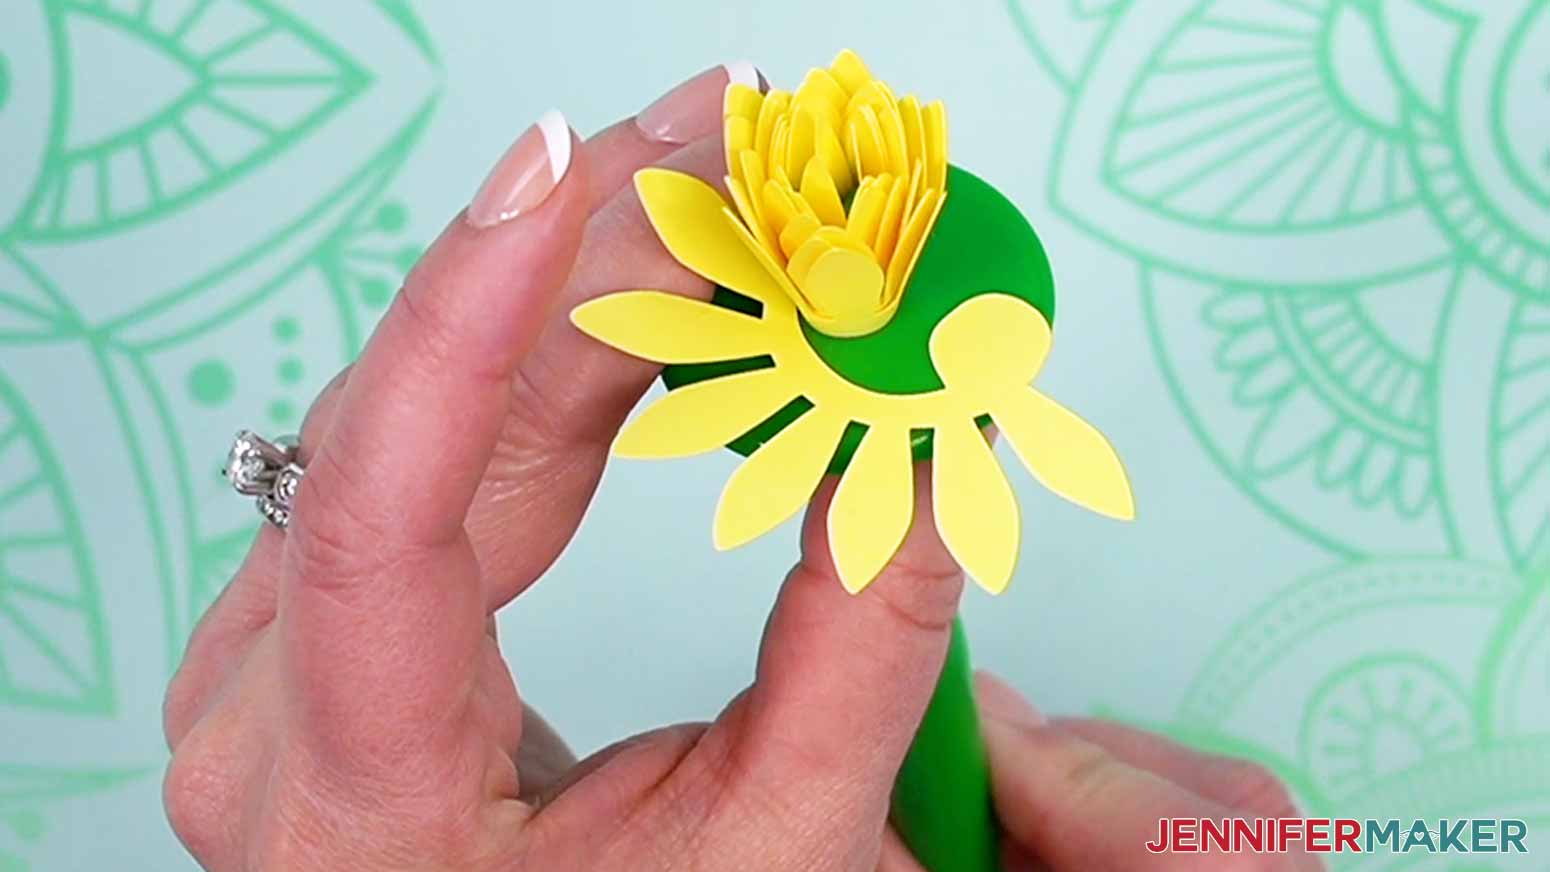 Leave the last part of the flower away from the center to add glue to secure it closed.